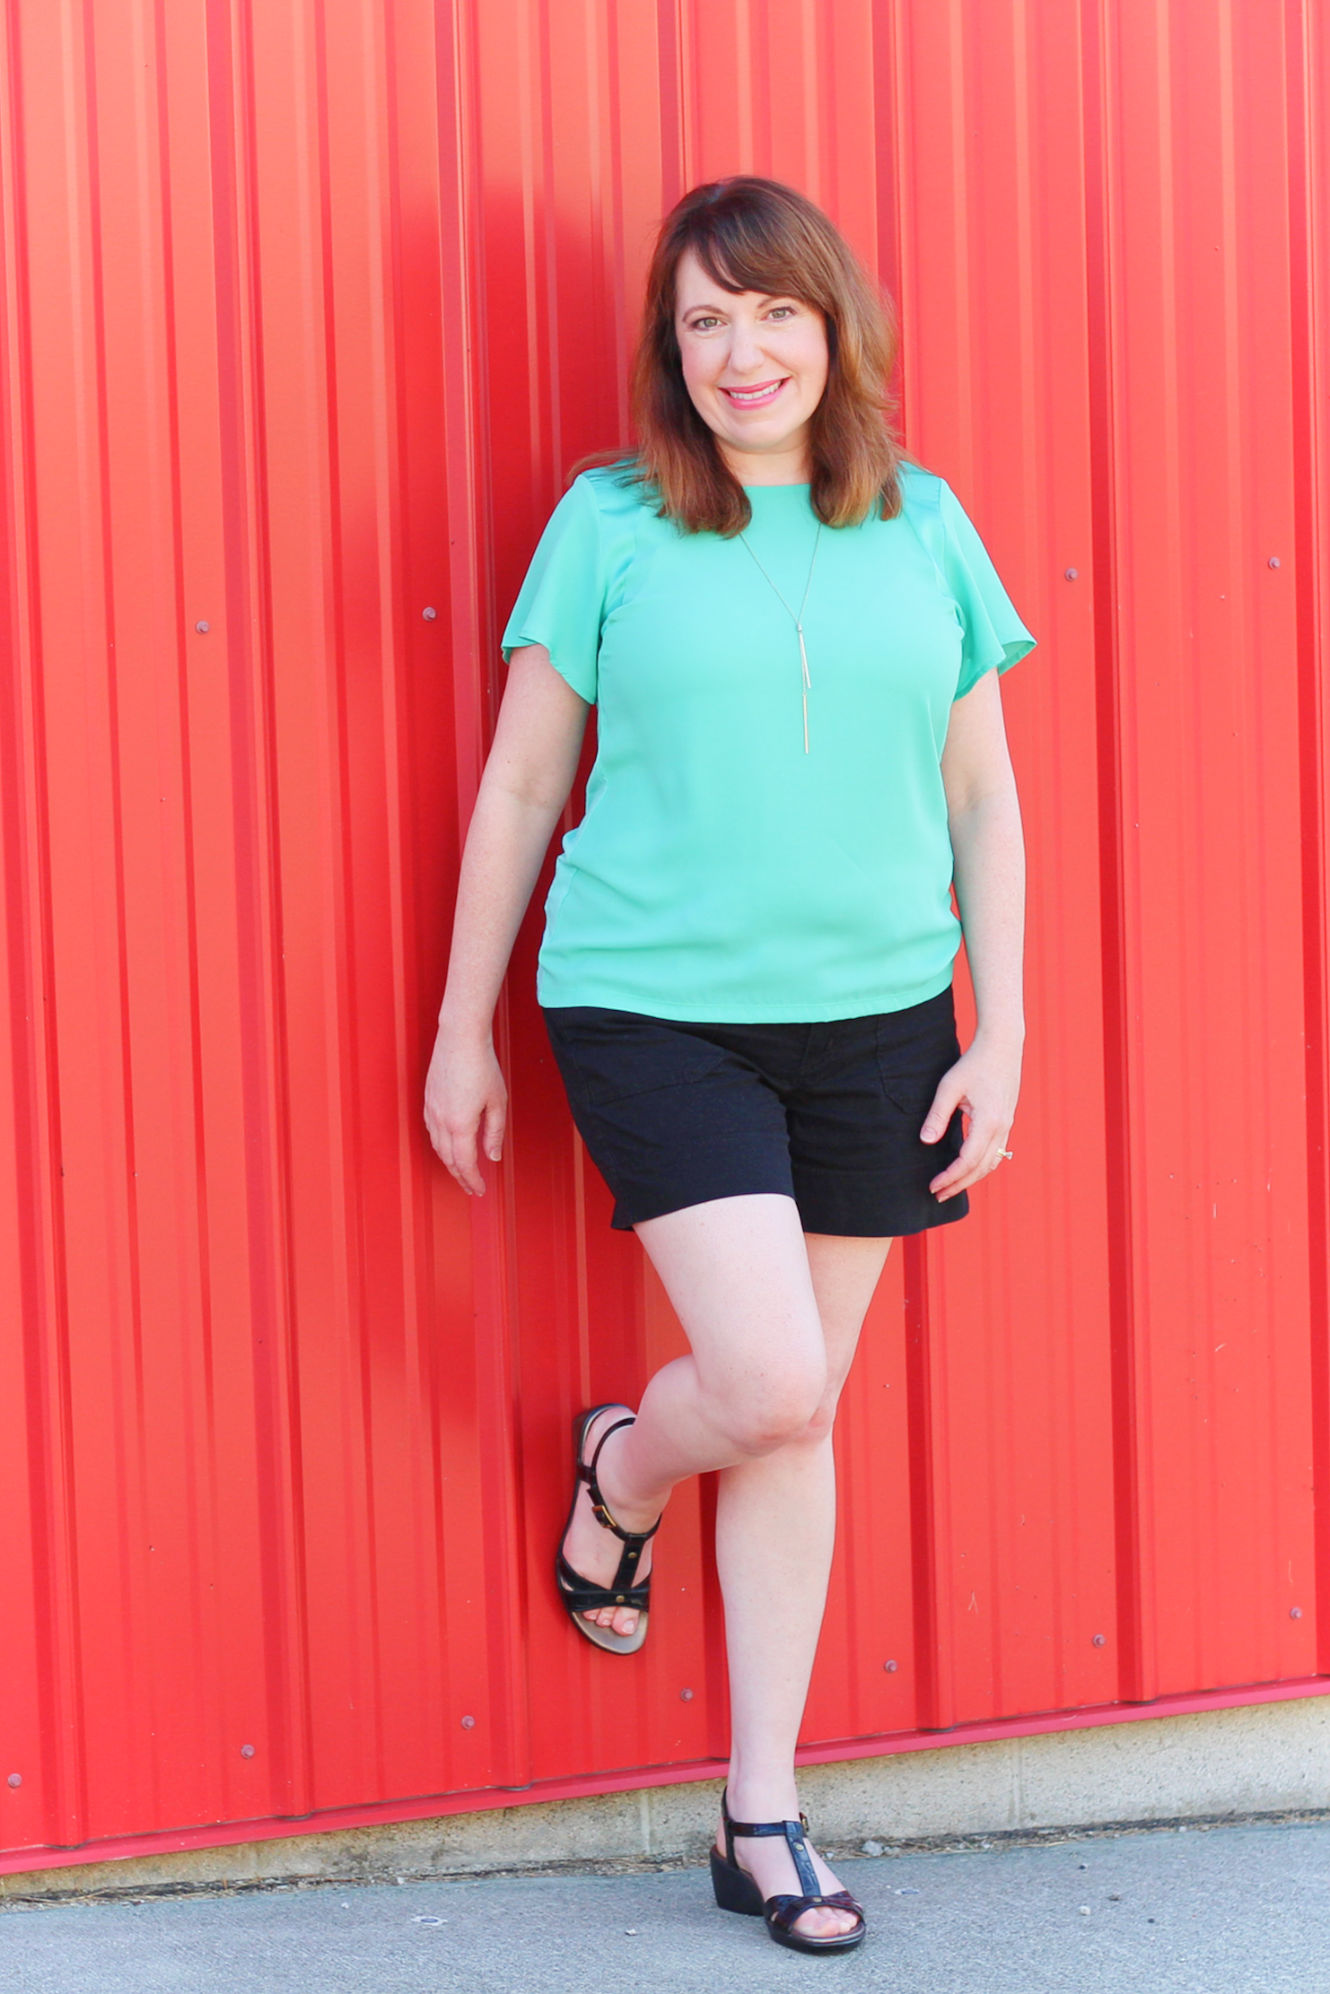 Green Top And Black Shorts #summeroutfit #fashionover40